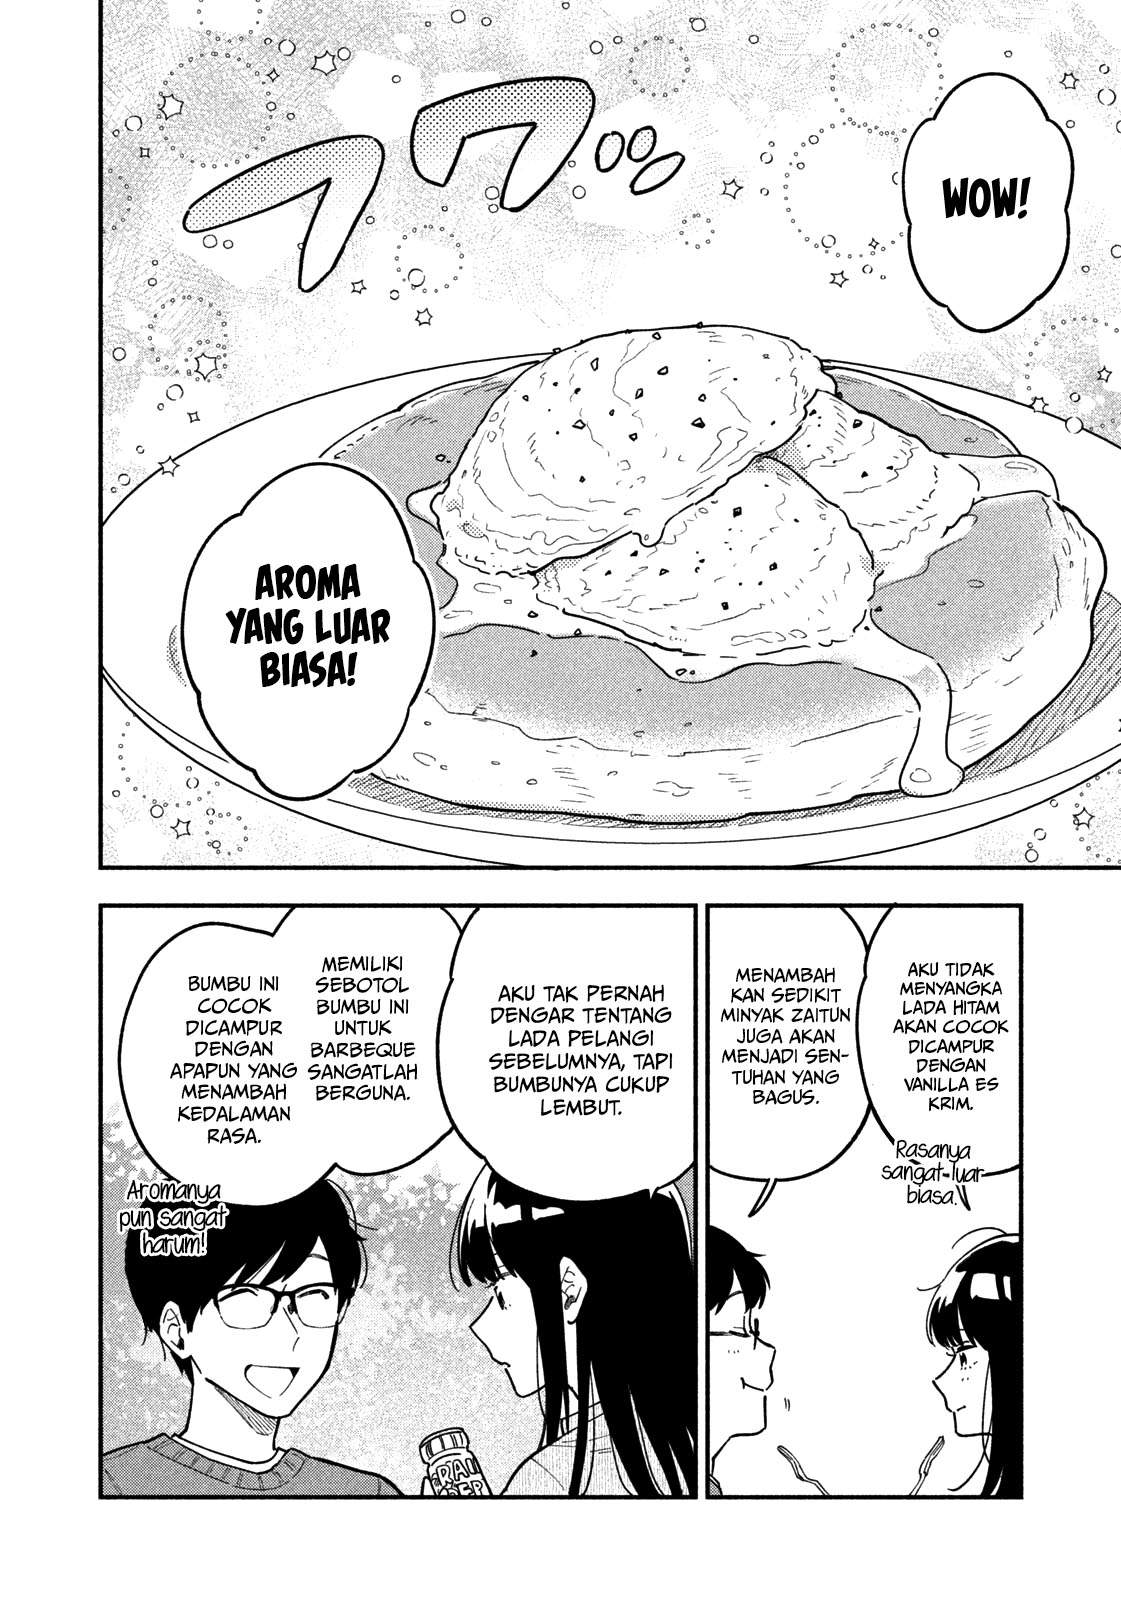 A Rare Marriage: How to Grill Our Love Chapter 2 19